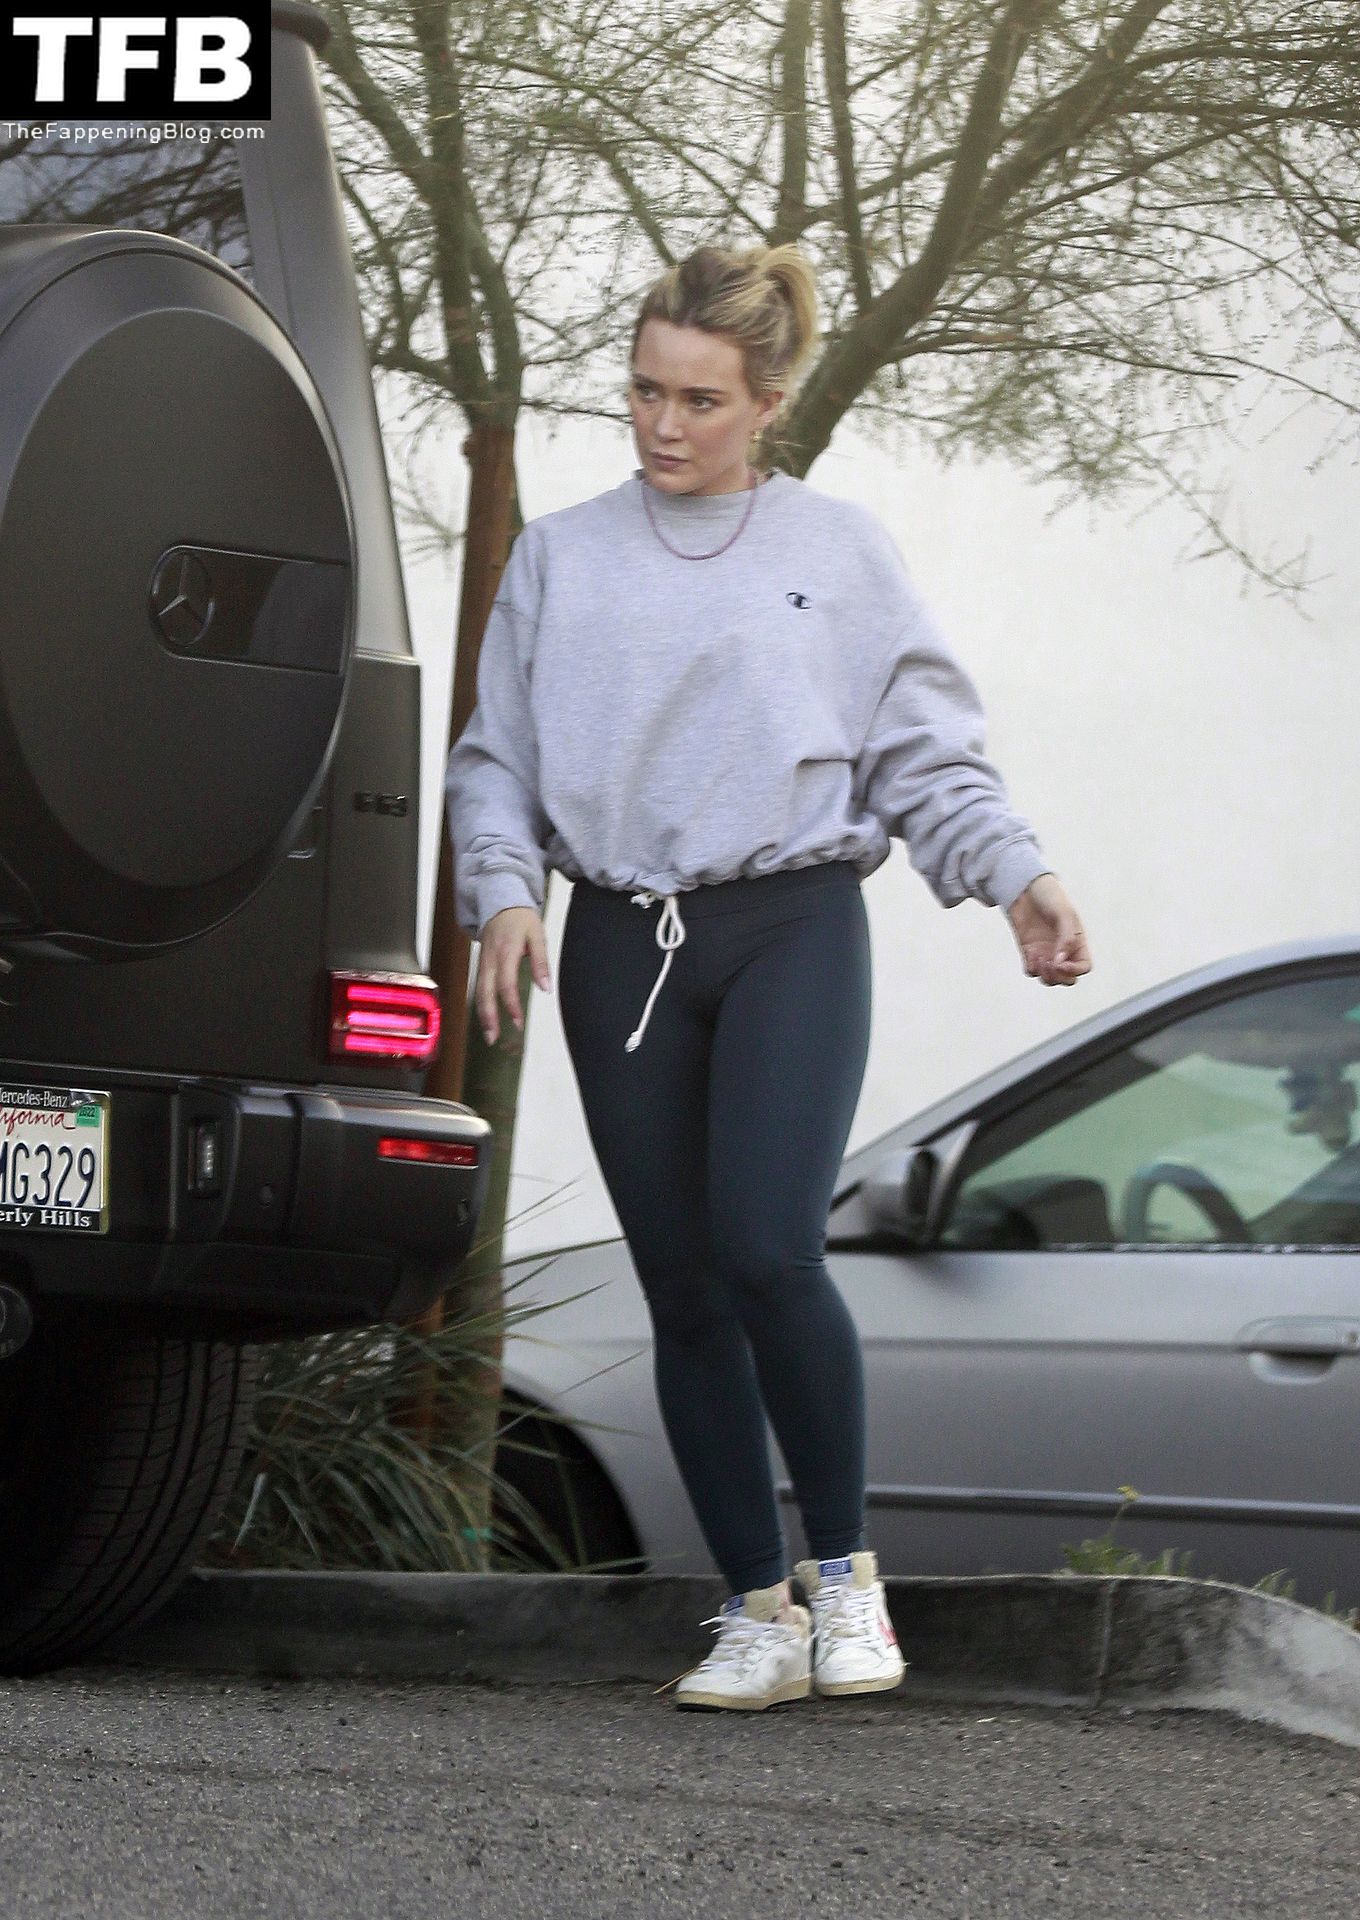 Hilary-Duff-shows-off-impressive-gym-results-in-a-pair-of-skintight-leggings-during-LA-errand-run...-one-day-after-hosting-quaint-Thanksgiving-gathering-at-her-home-The-Fappening-Blog-6.jpg